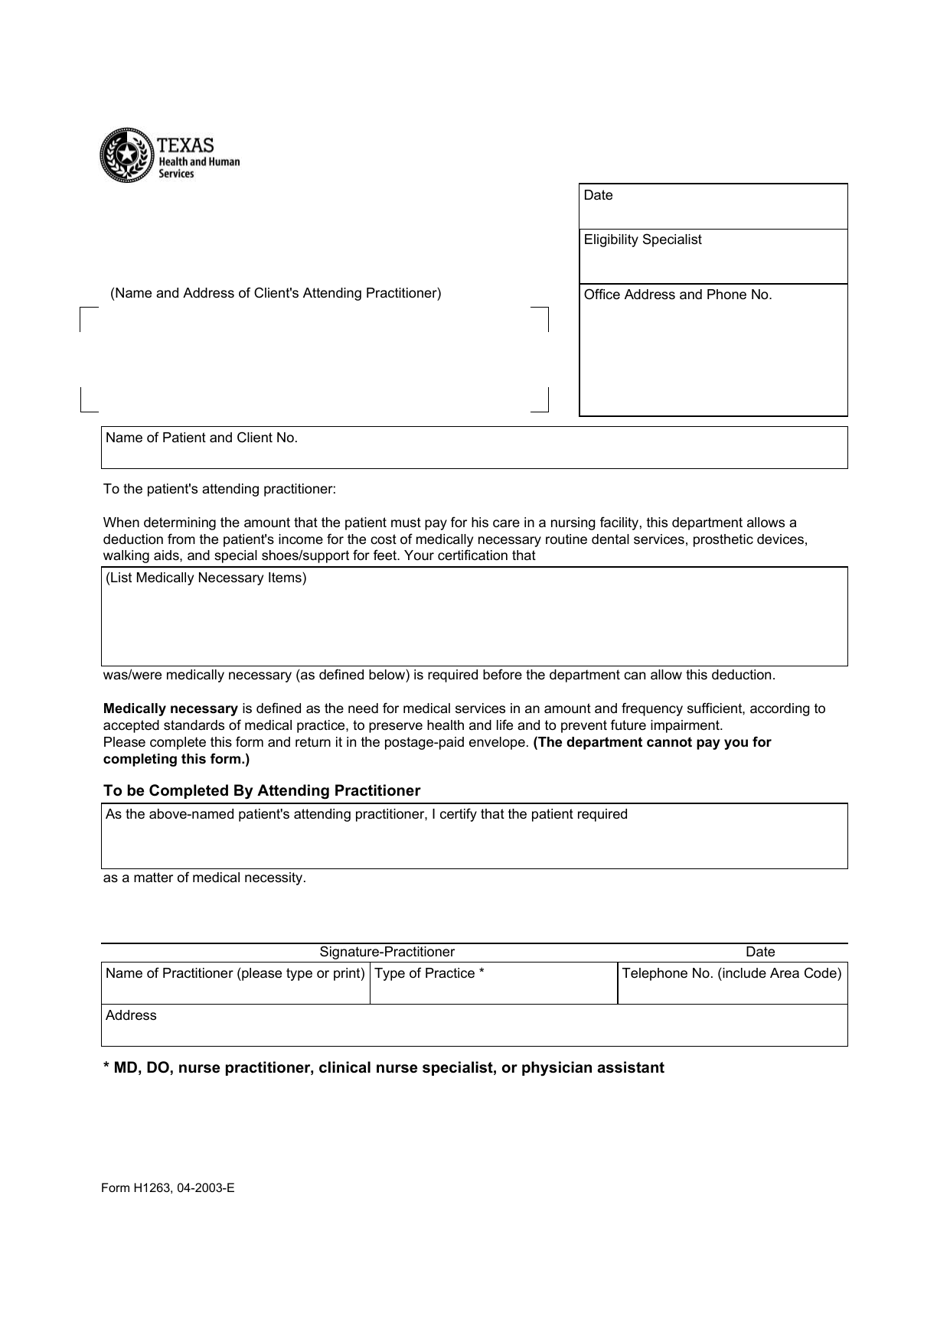 Form H1263 Certification of Medical Necessity - Texas, Page 1